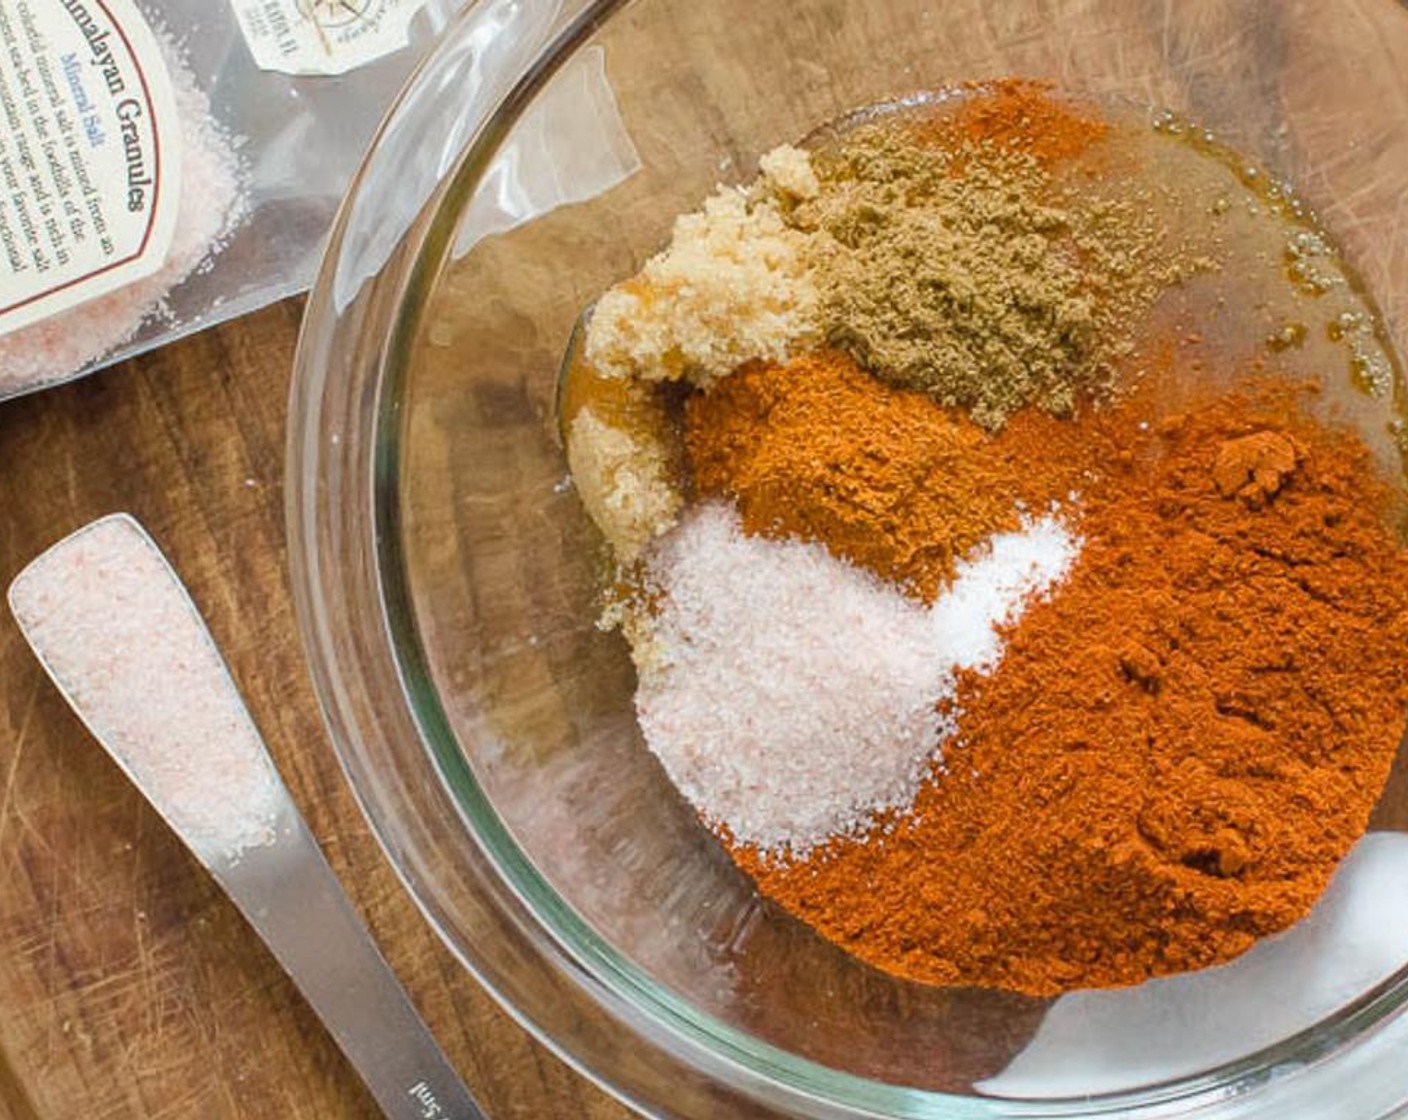 step 1 In a medium bowl combine the Brown Sugar (1/4 cup), Kosher Salt (1/4 cup), Honey (1/4 cup), Cayenne Pepper (1 tsp), Smoked Paprika (2 Tbsp), Ground Cumin (1/2 tsp), and Curing Salt (1/2 Tbsp), stirring until well mixed.